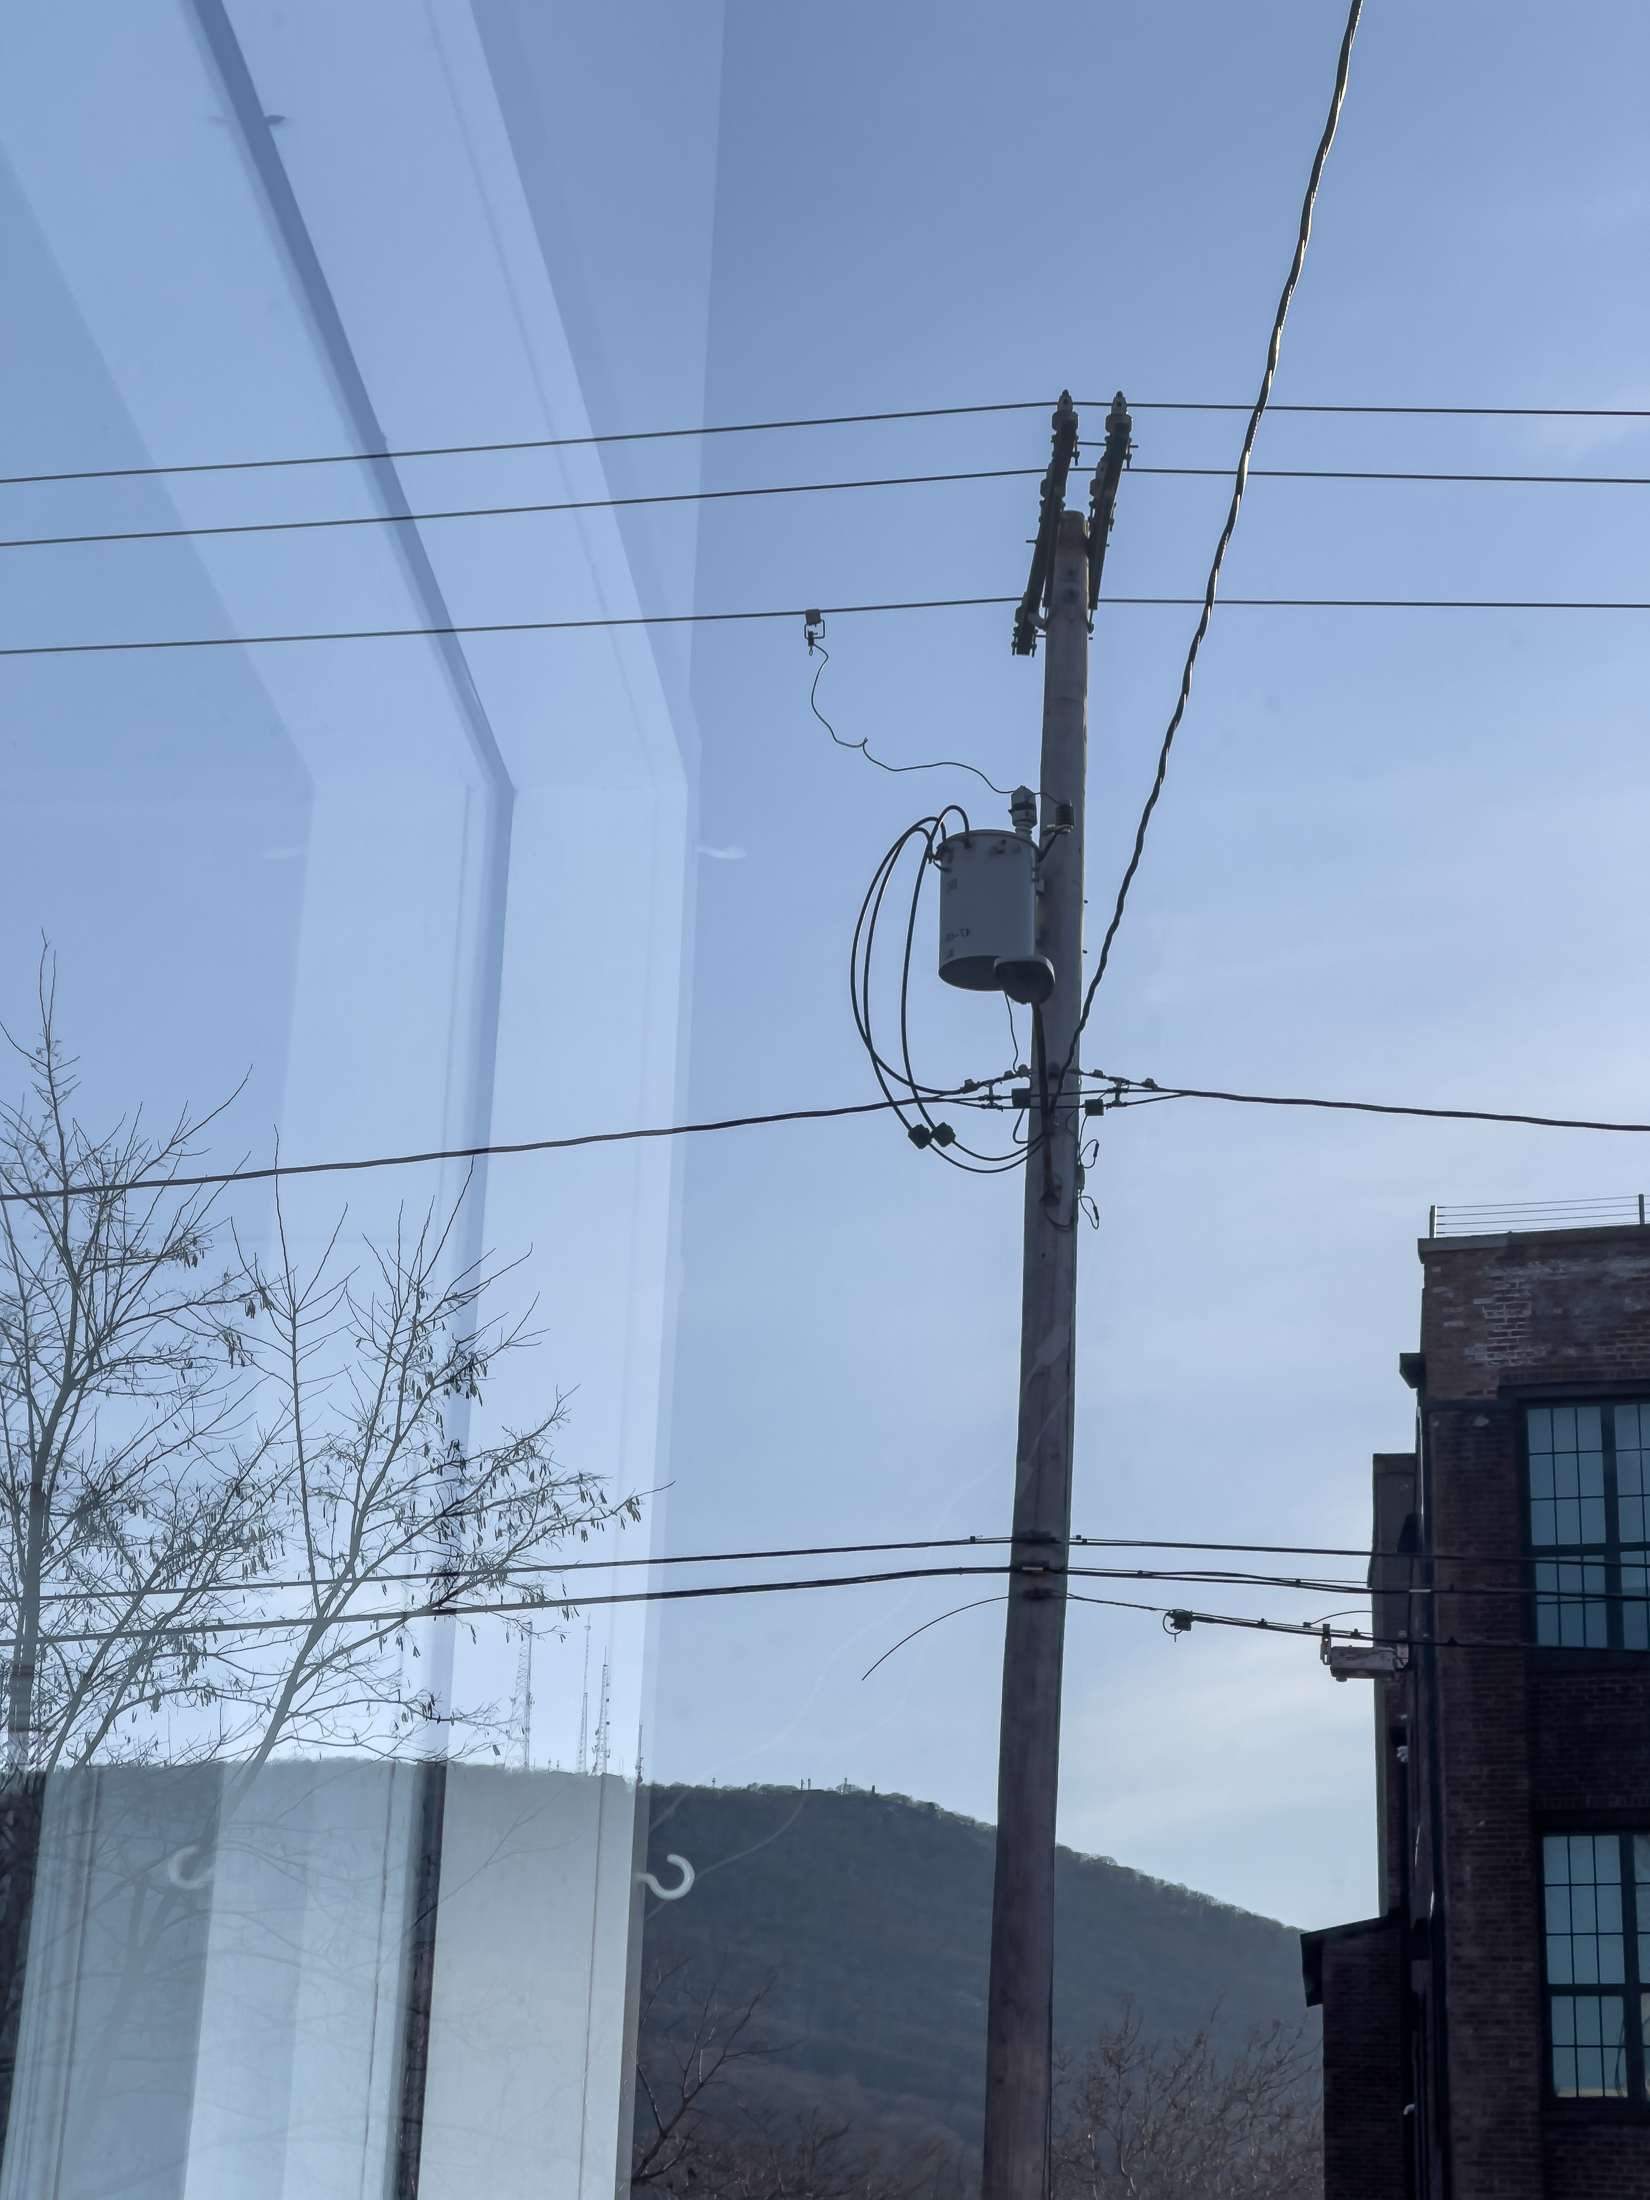 Landscape, utility pole and building reflected in a window.